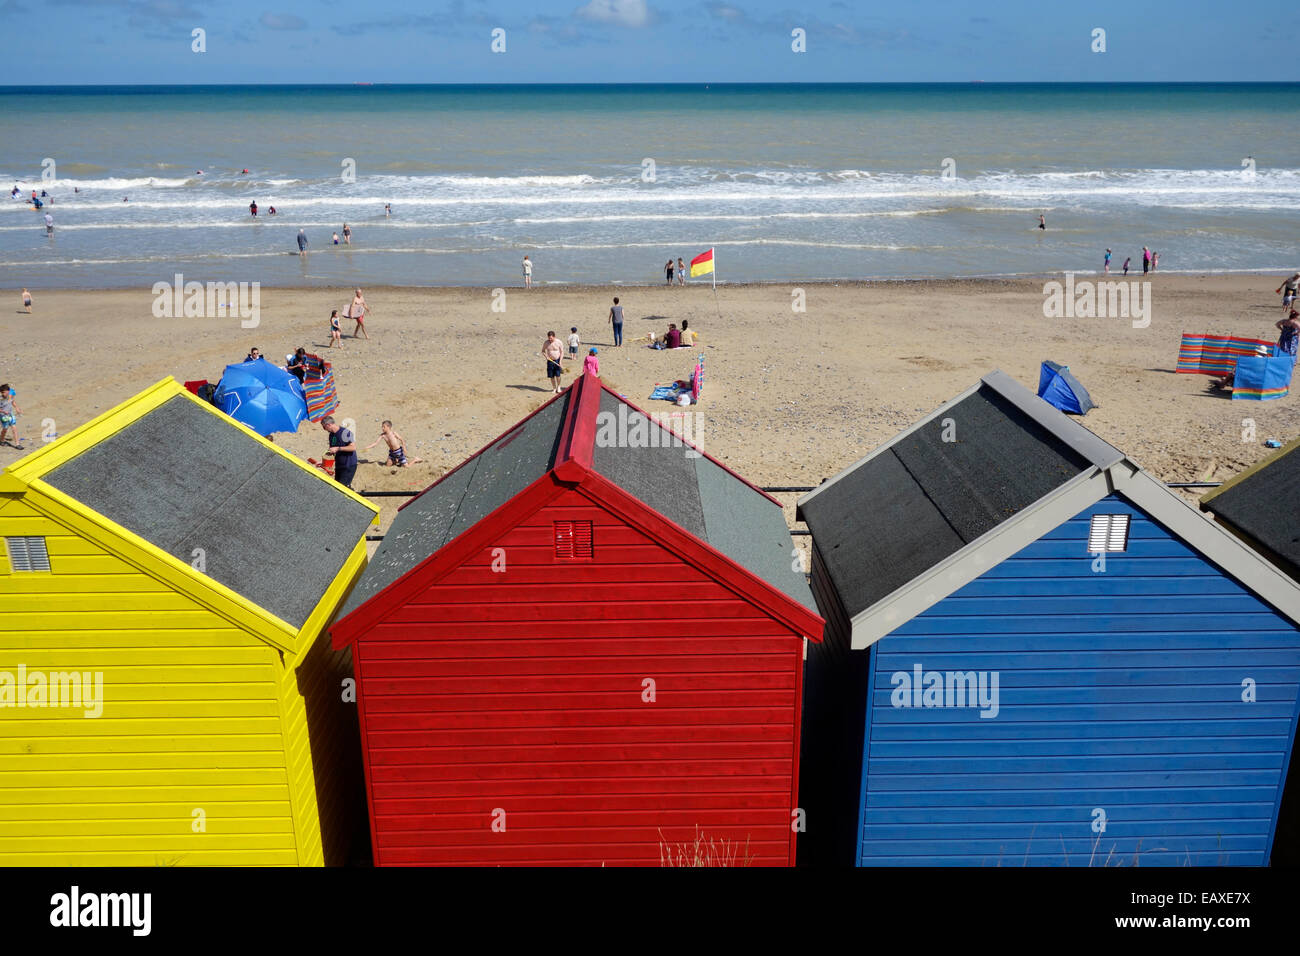 Row of colourful beach huts at the beach at Mundesley, Norfolk Stock Photo